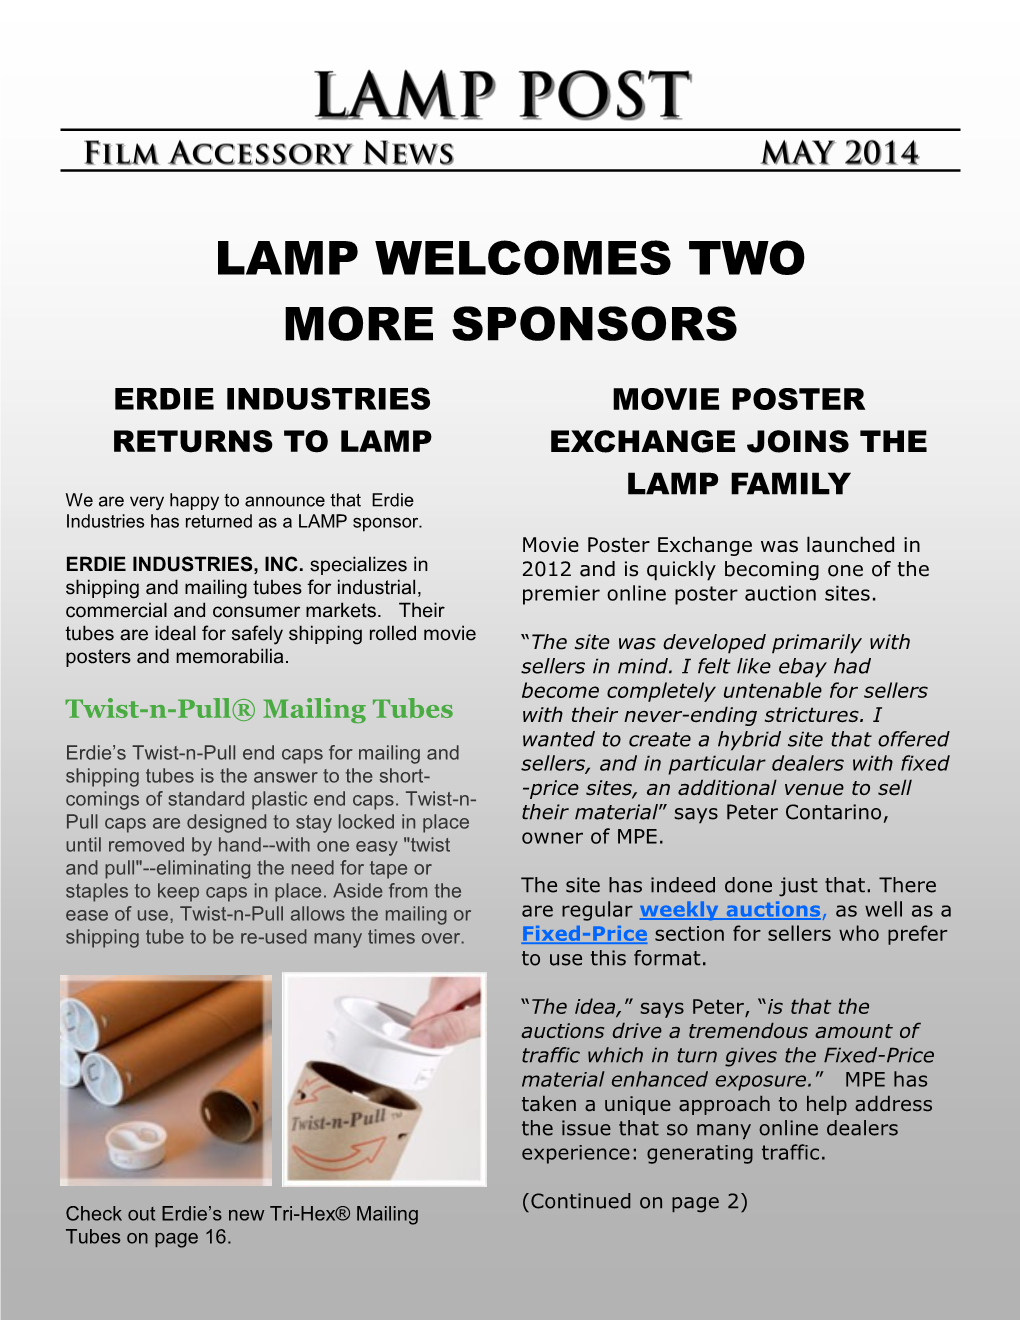 Lamp Welcomes Two More Sponsors